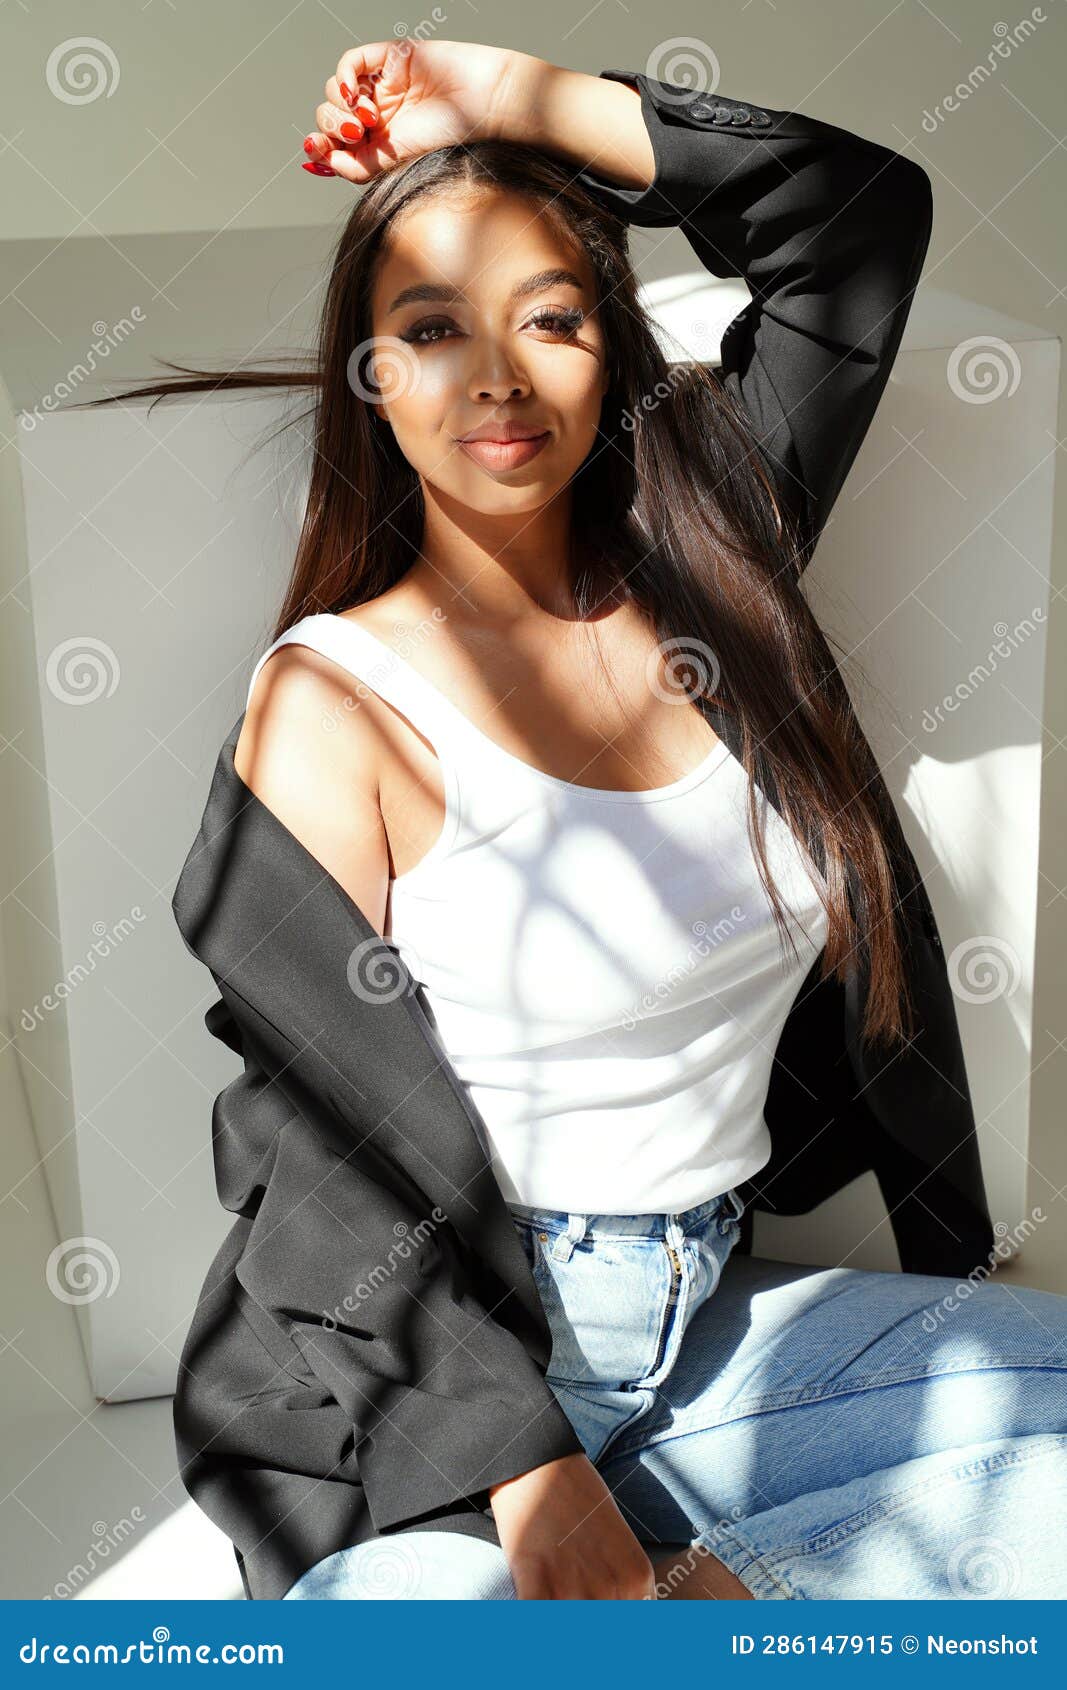 Cheerful Young Woman in Casual Outfit, in White Tank Top, Jeans and Black  Jacket, Posing in Studio, Looking at the Camera Stock Image - Image of  model, casual: 286147915